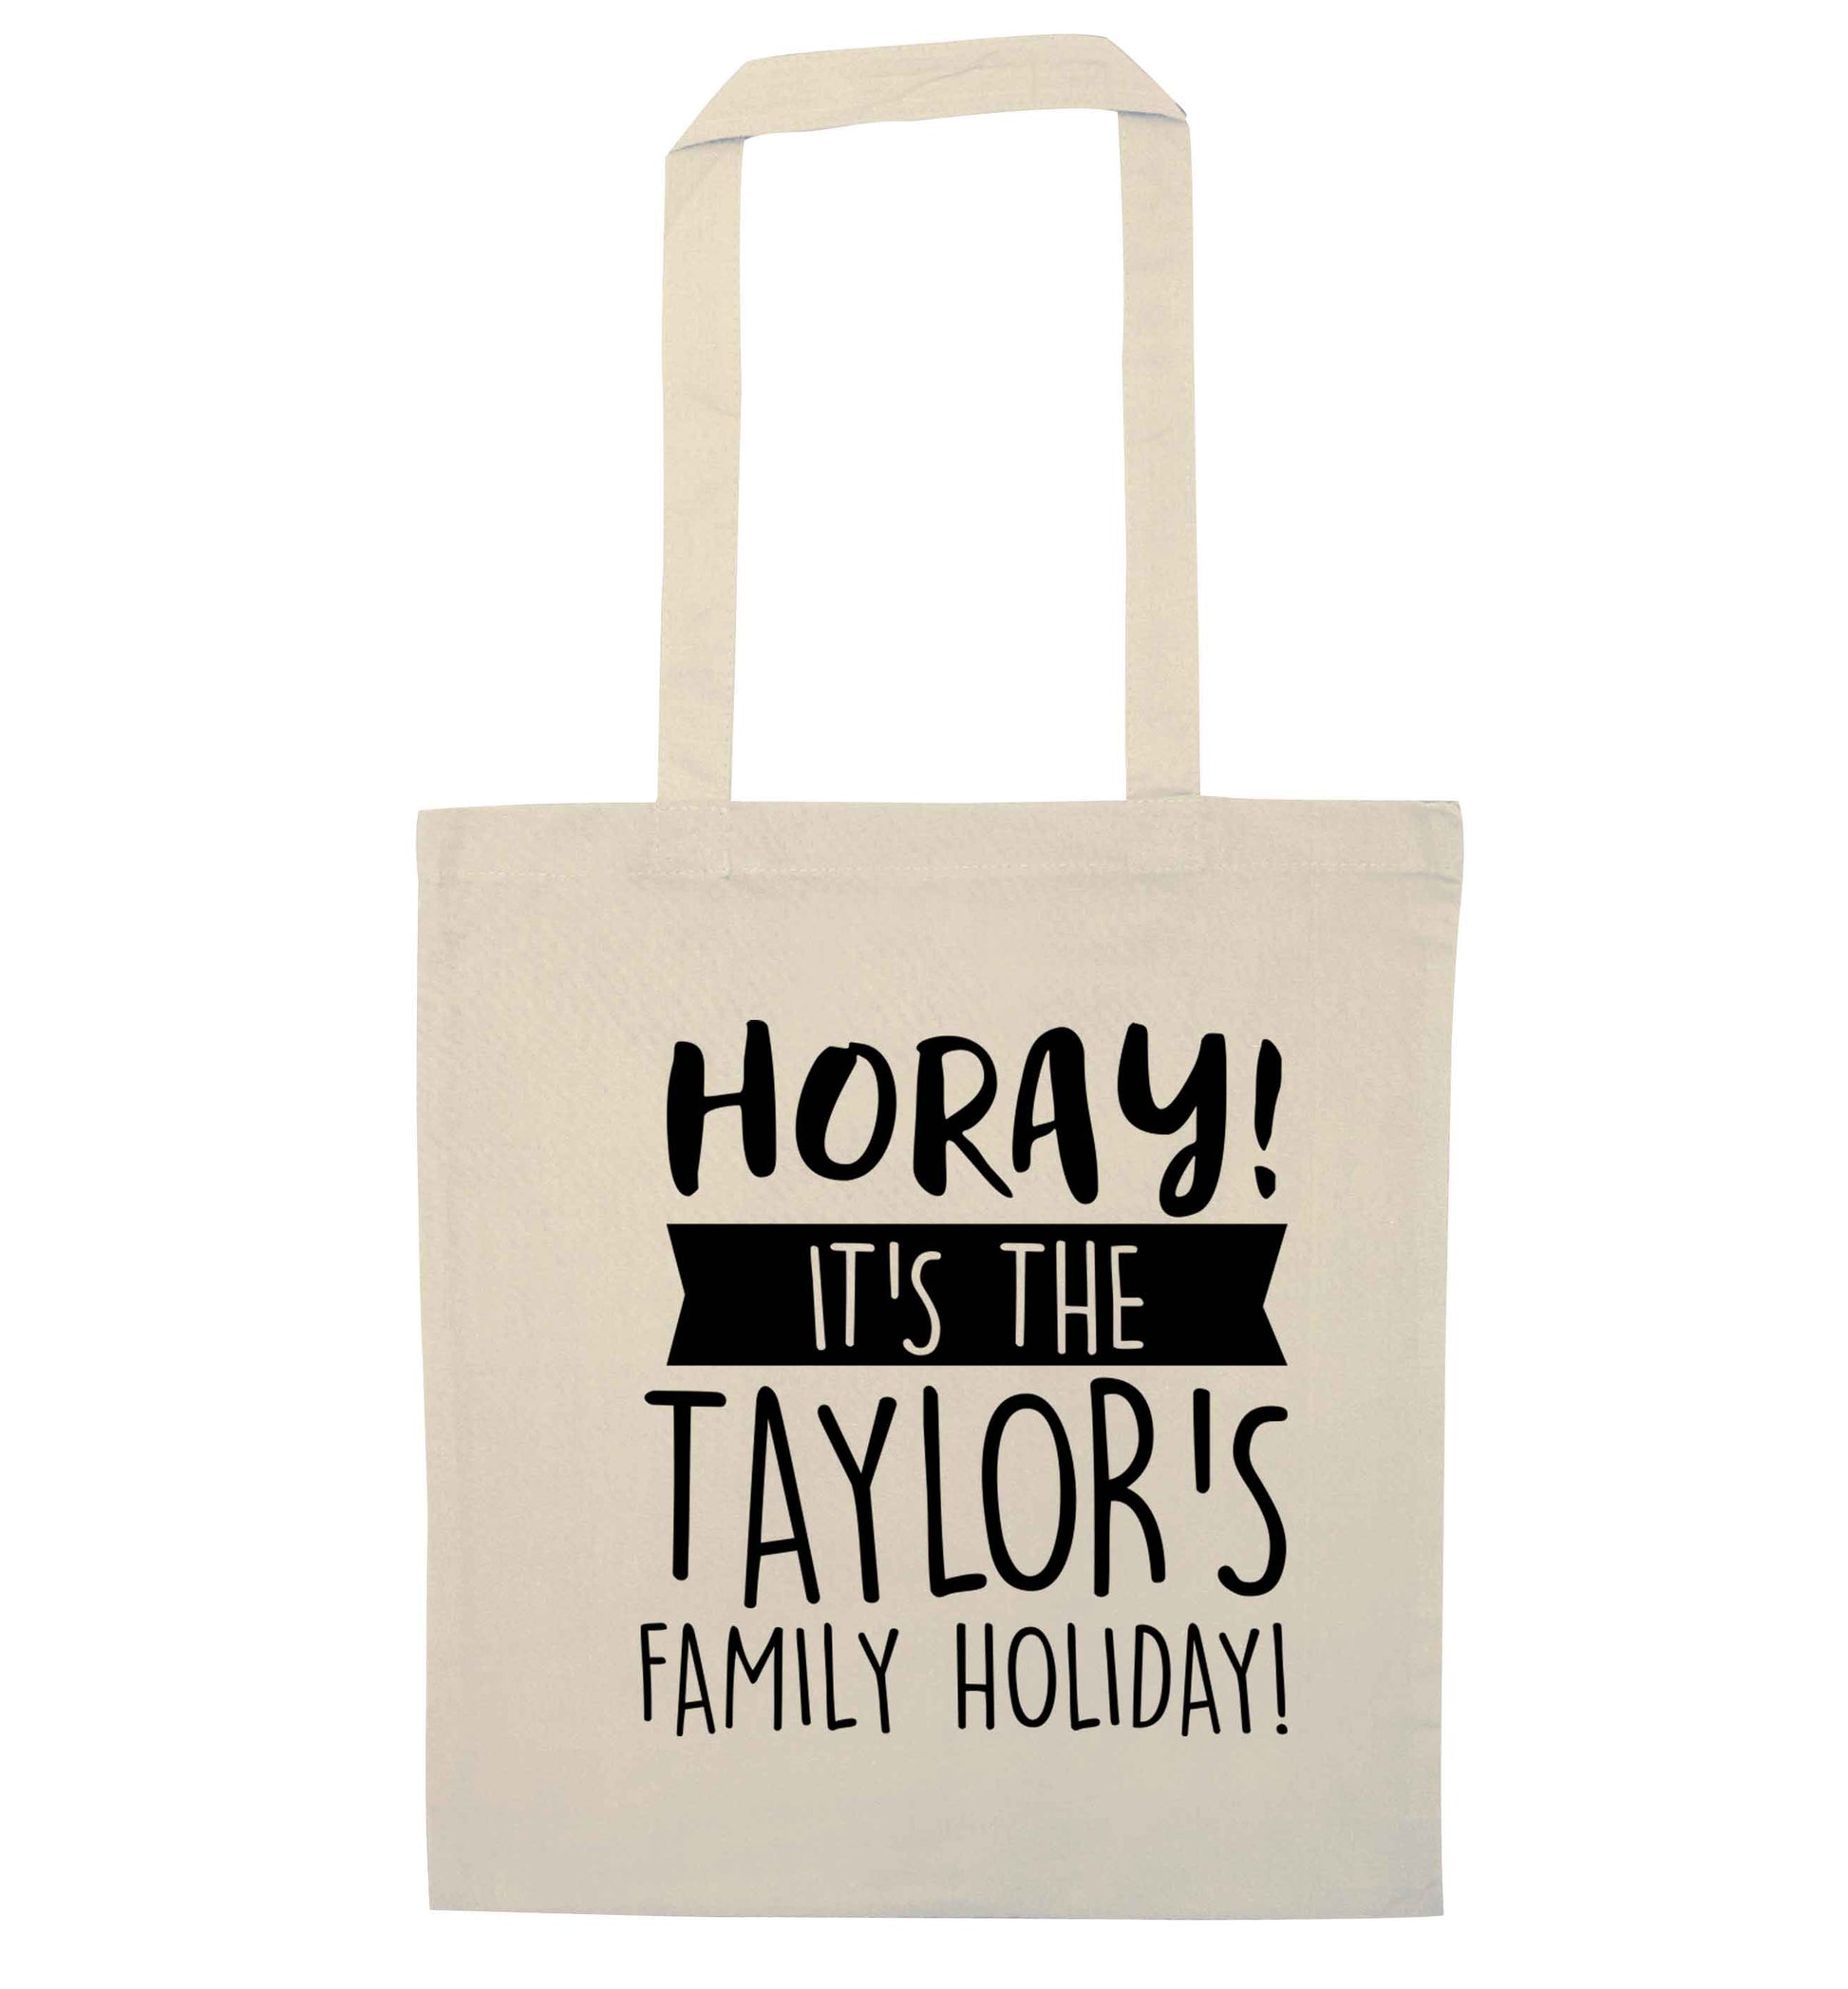 Horay it's the Taylor's family holiday! personalised item natural tote bag